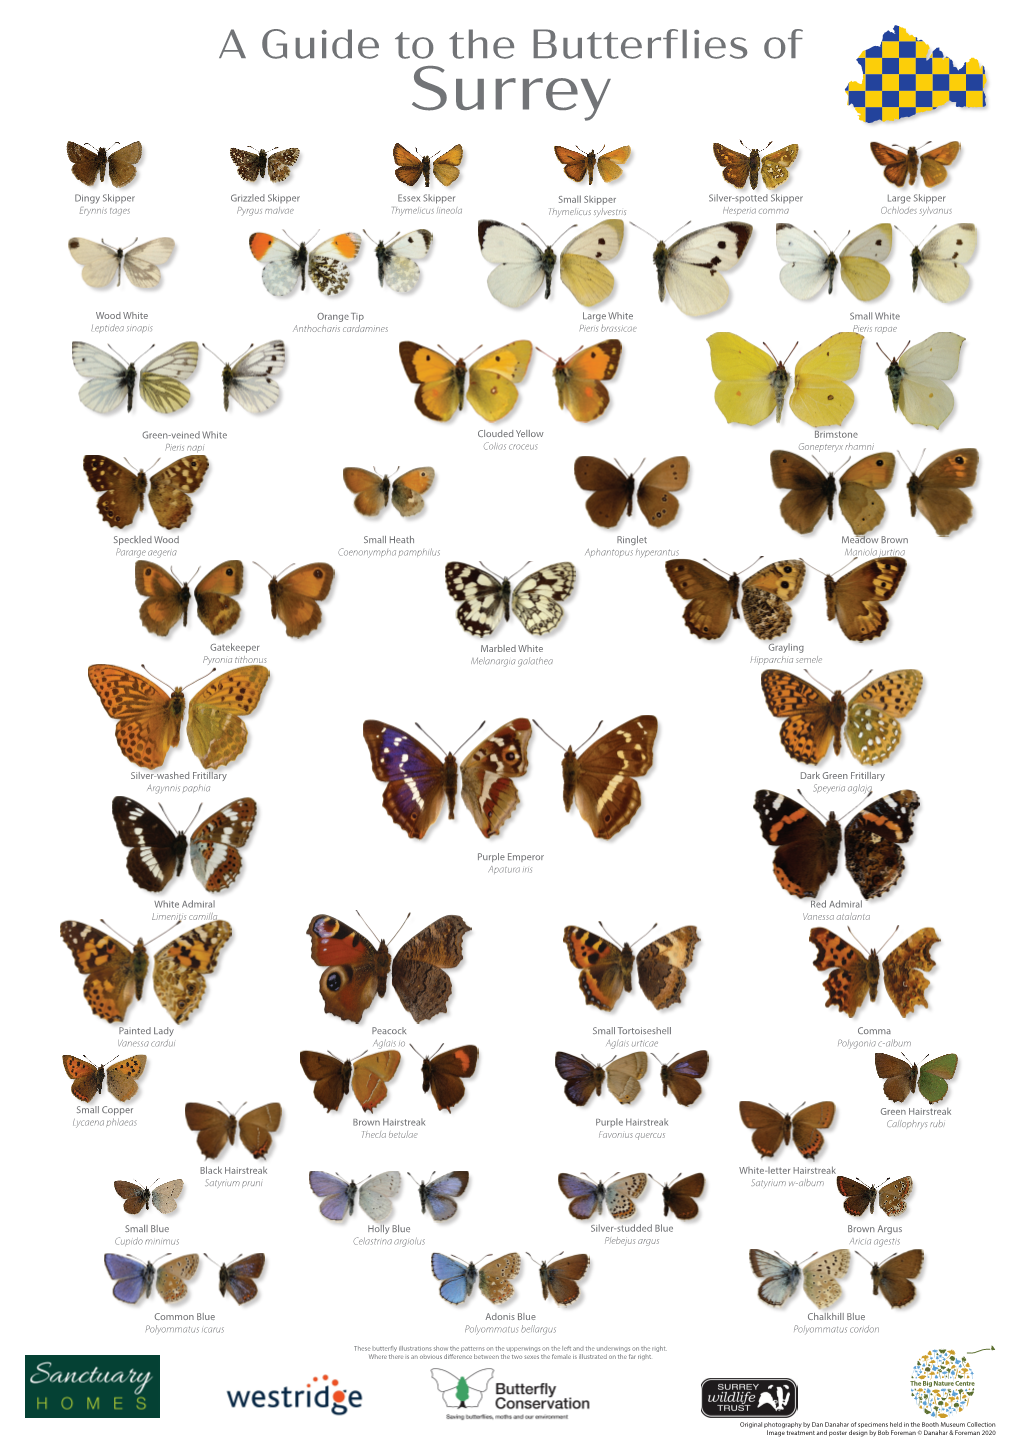 A Guide to the Butterflies of Surrey